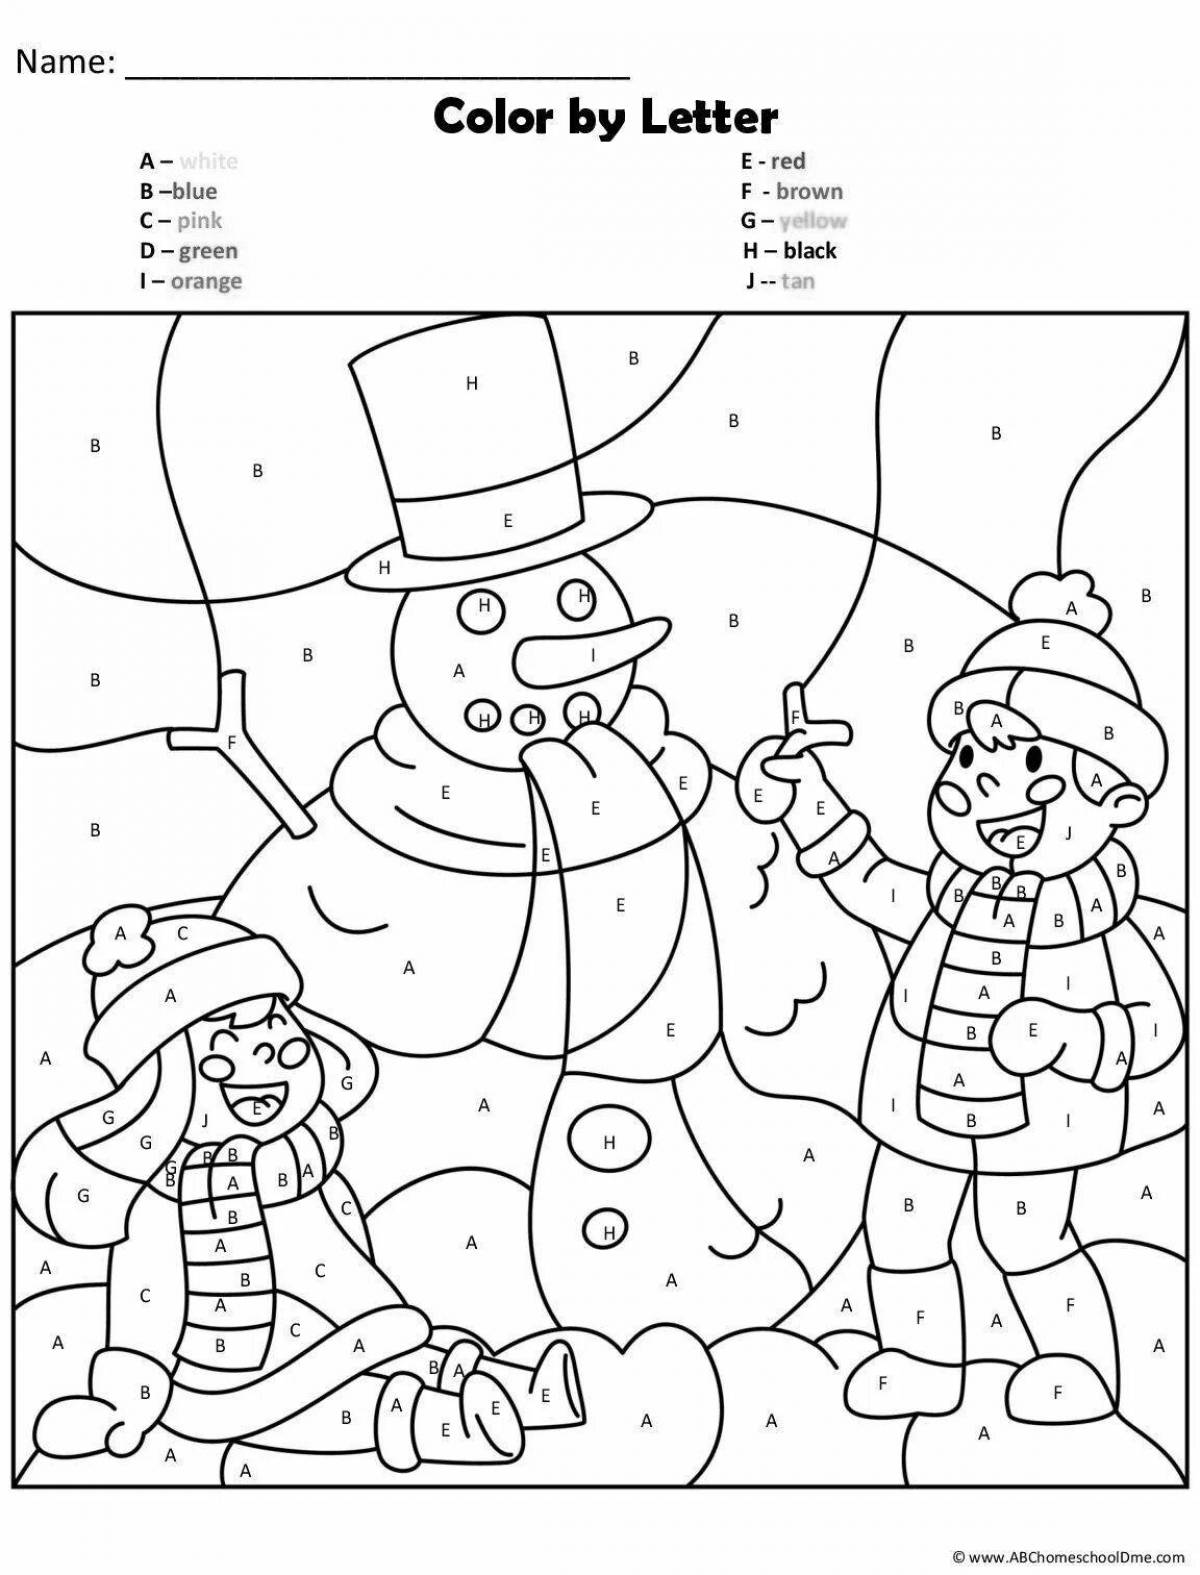 Bright coloring by numbers snowman